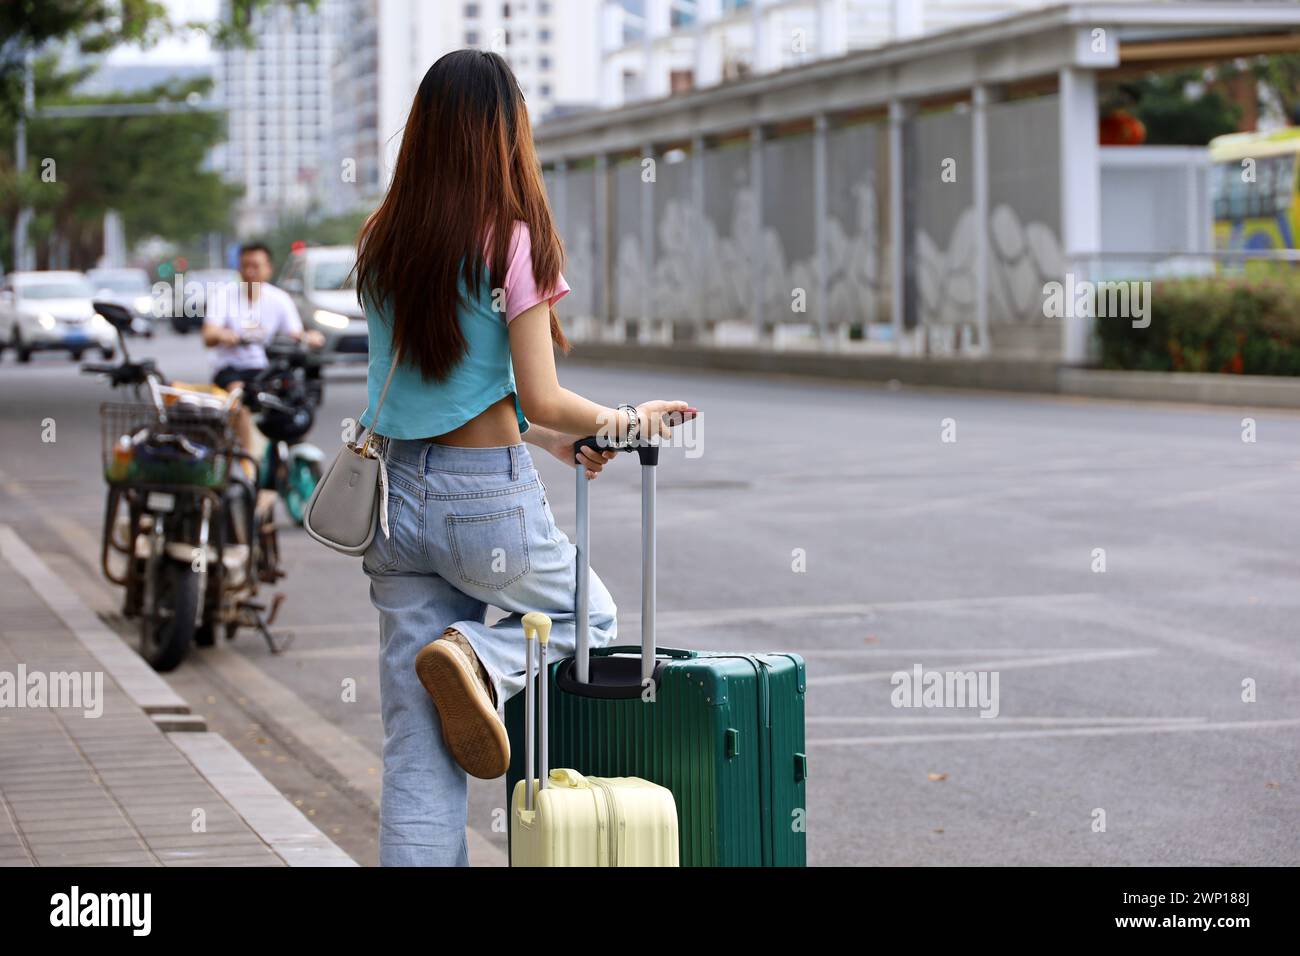 Girl in jeans standing with a suitcases on city street. Concept of travel and summer holidays Stock Photo